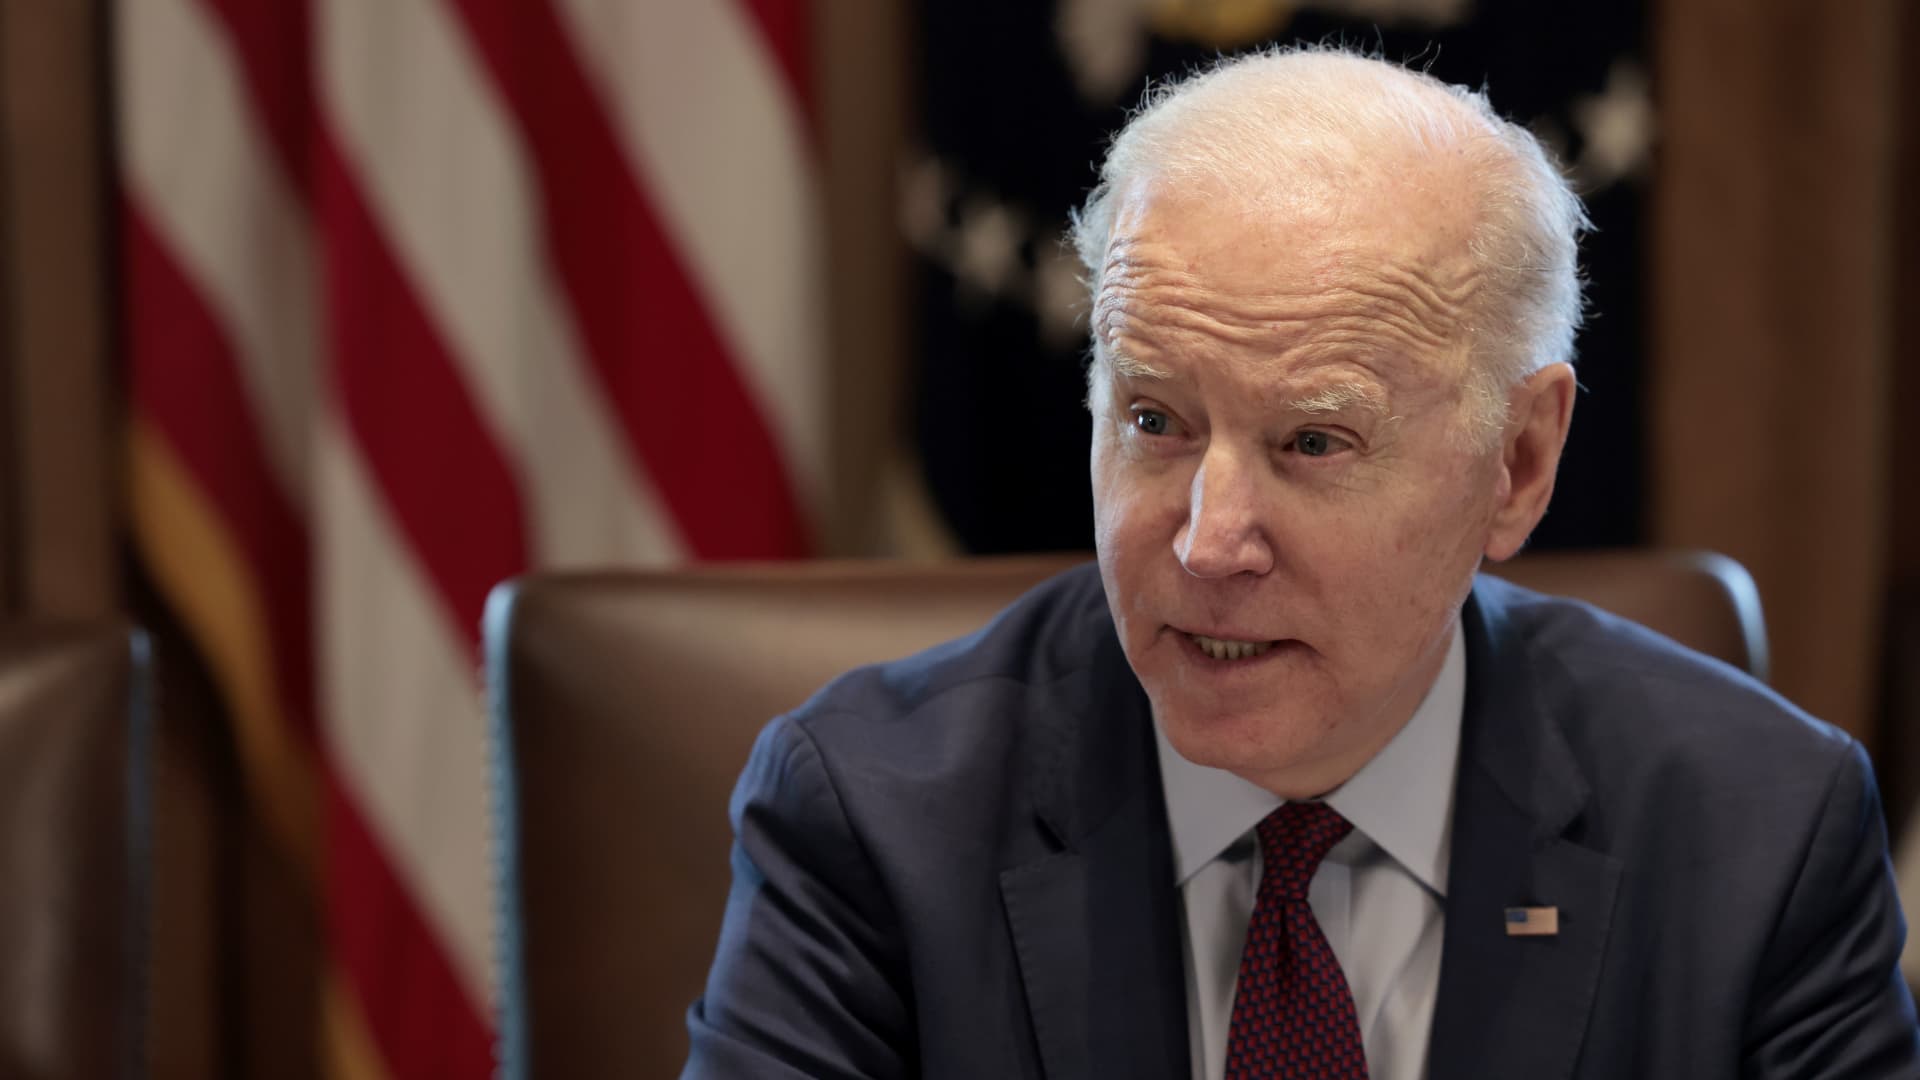 President Joe Biden speaks to reporters before the start of a cabinet meeting in the Cabinet Room of the White House on March 03, 2022 in Washington, DC.